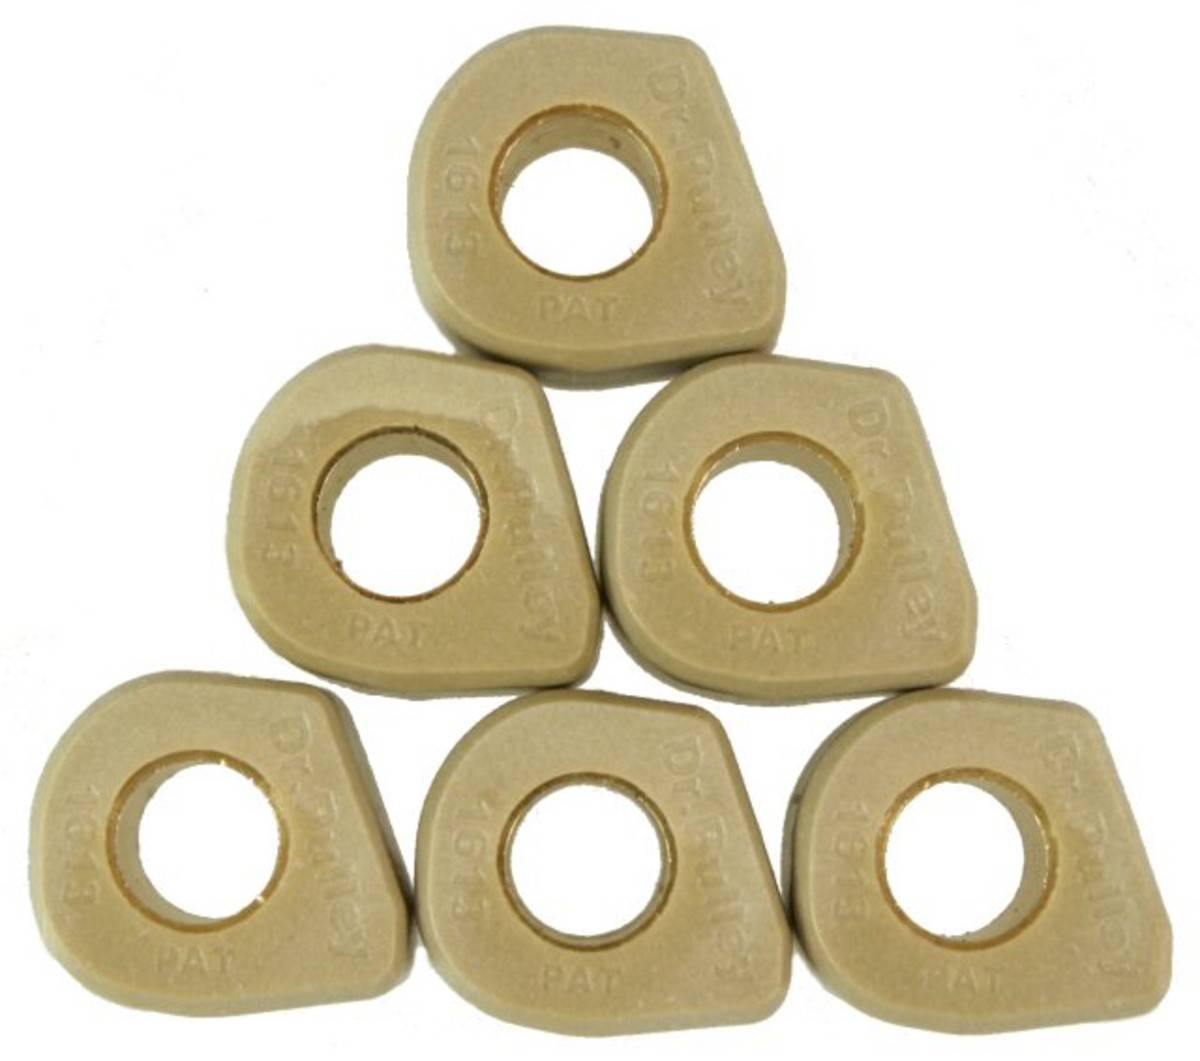 Dr. Pulley 16×13 Sliding Roller Weights QMB139 (50cc)